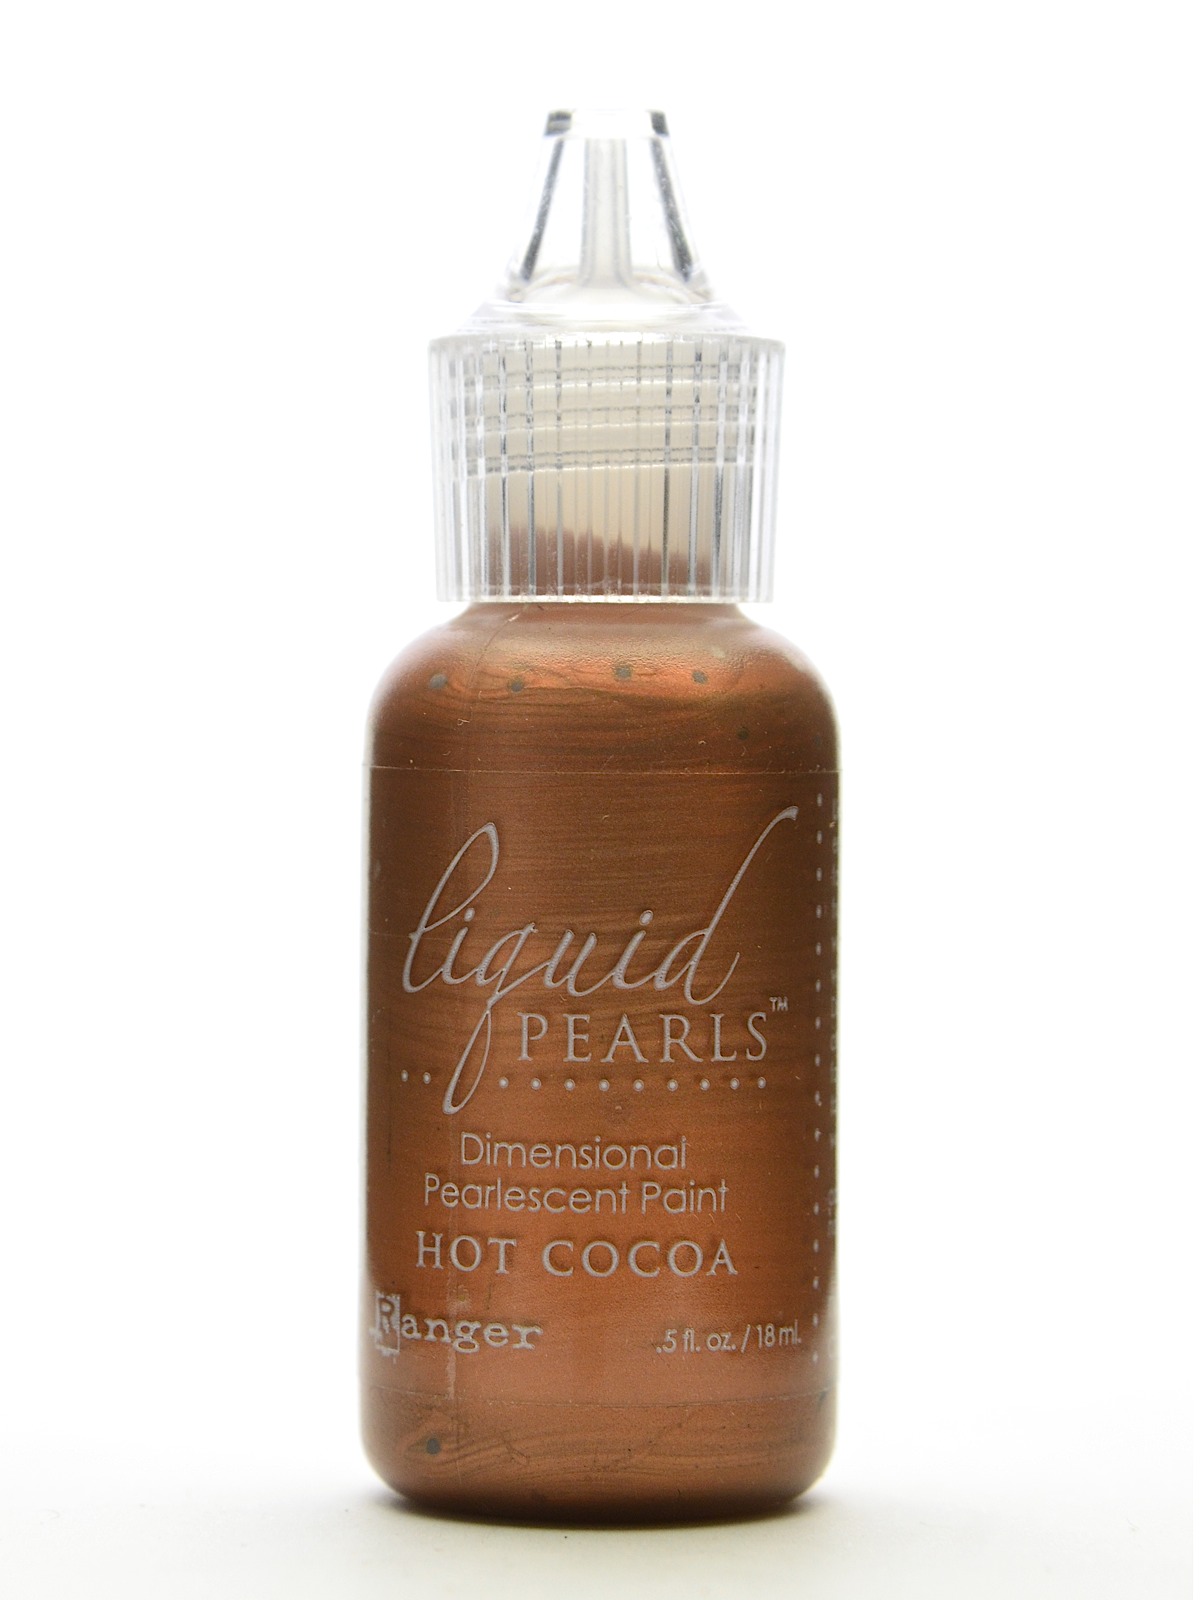 Liquid Pearls Pearlescent Paint Hot Cocoa 0.5 Oz. Bottle